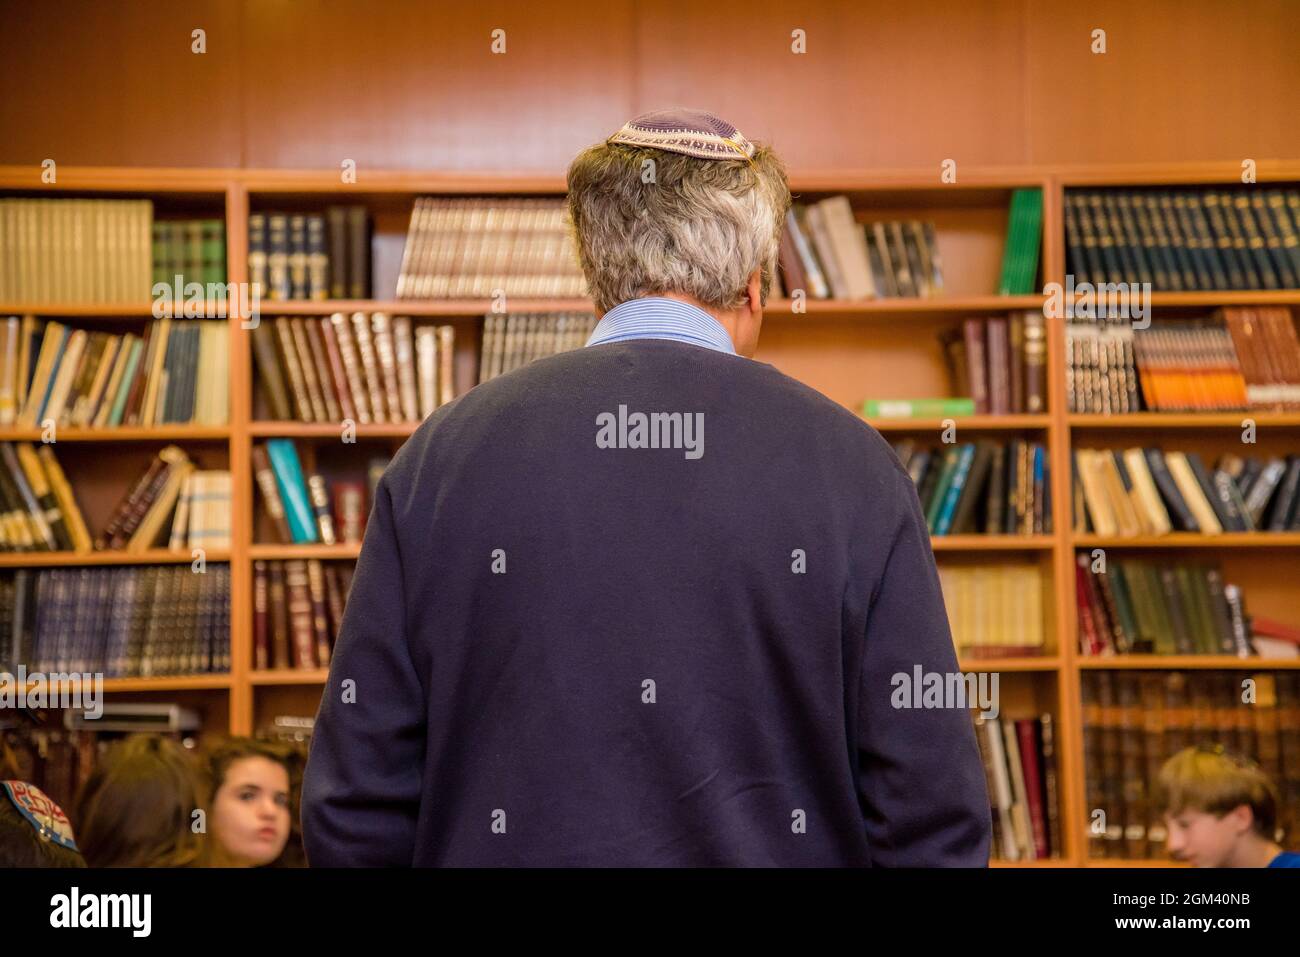 Jewish man with gray hair wearing a yarmulke from the back in a library of book shelves. Stock Photo